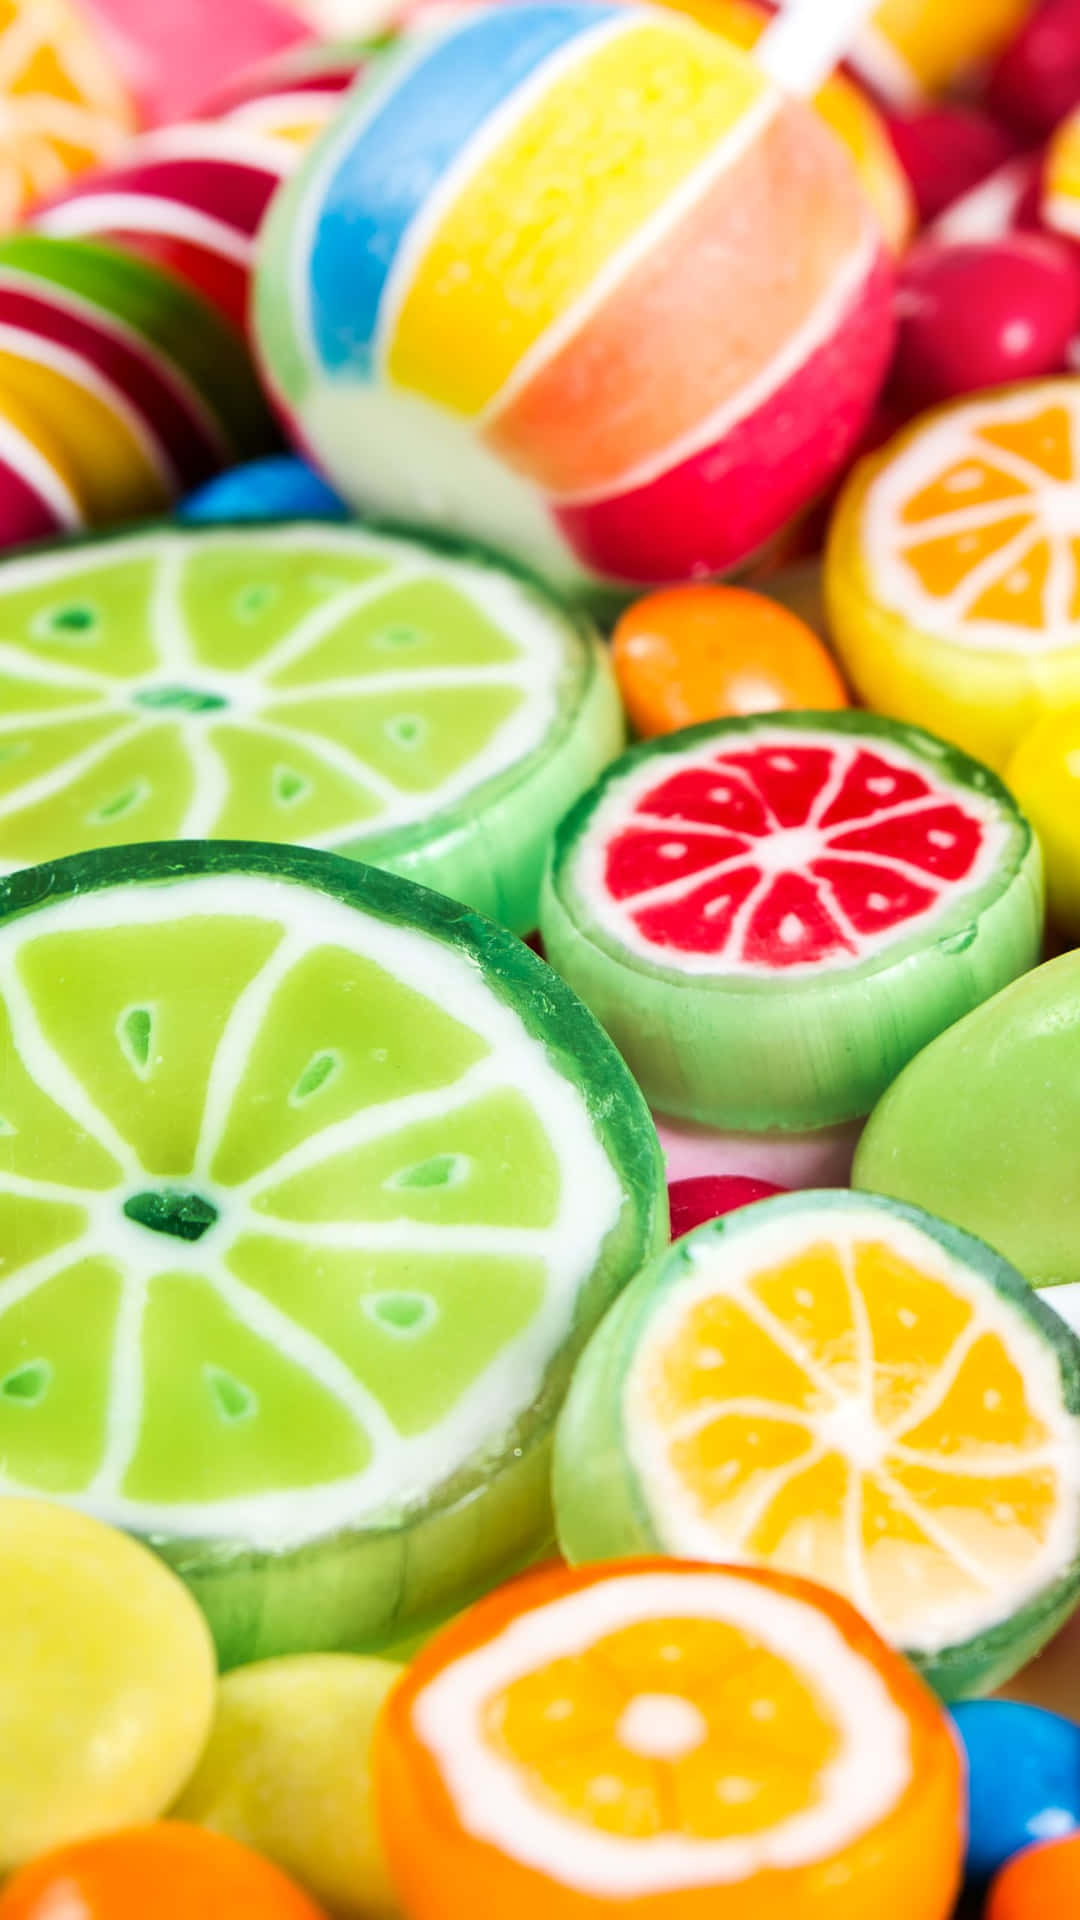 Assortment Of Colorful Candies On A Vibrant Background